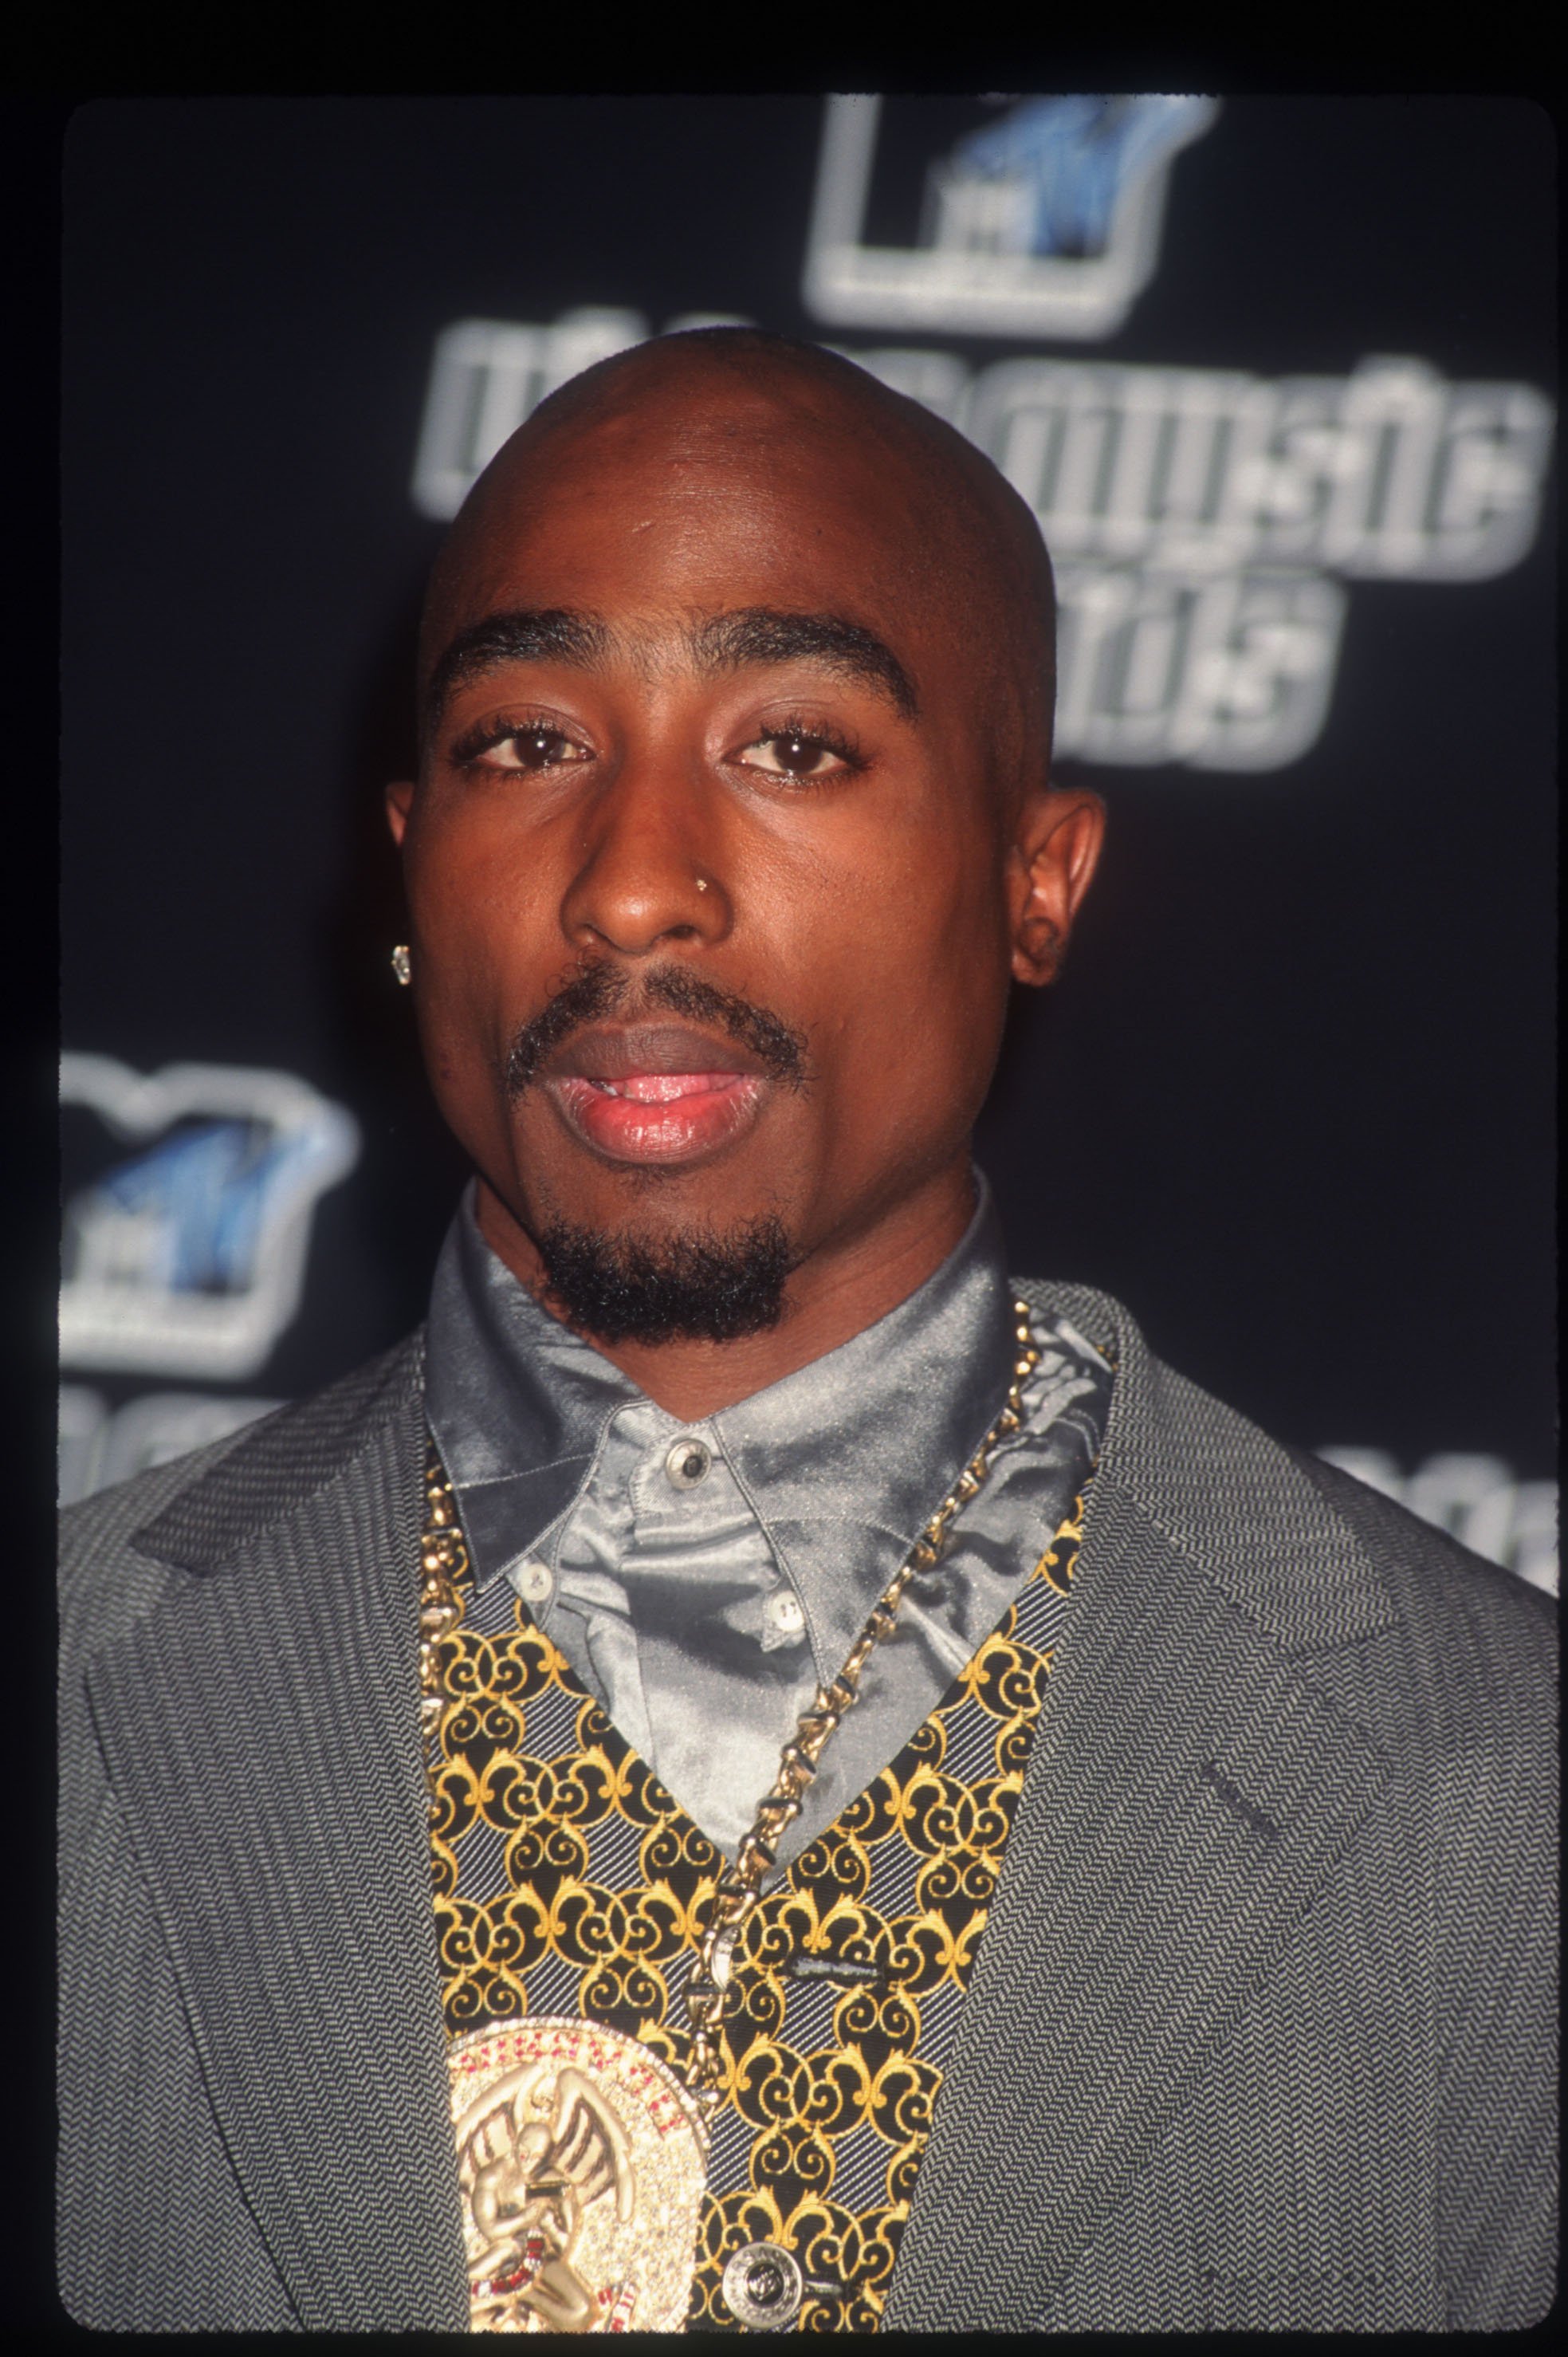 Tupac Shakur backstage at the MTV Video Music Awards September 4, 1996 in New York City. | Photo: GettyImages